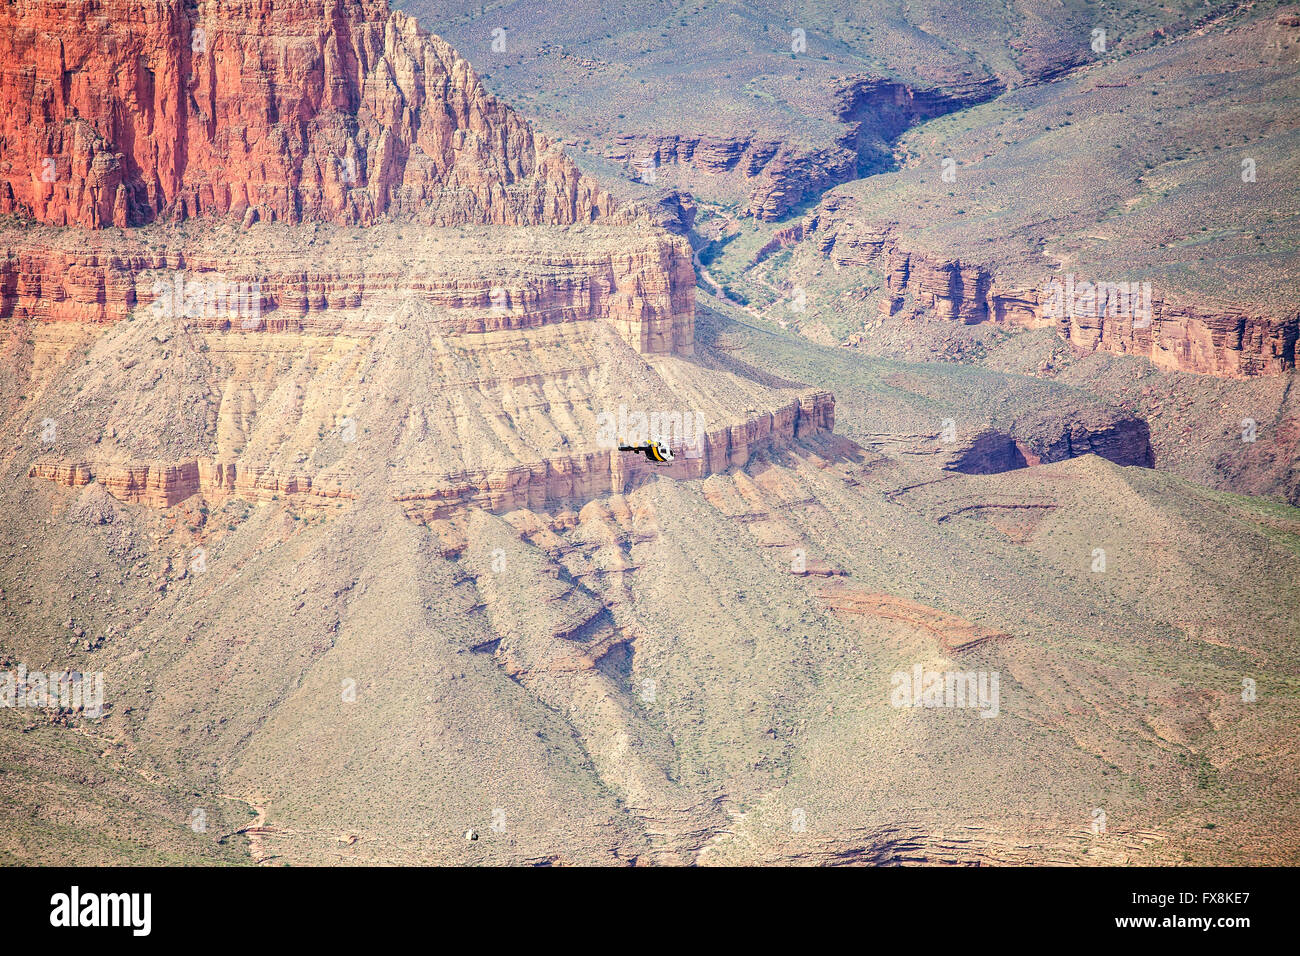 Helicopter carrying load over Grand Canyon, Arizona, USA. Stock Photo